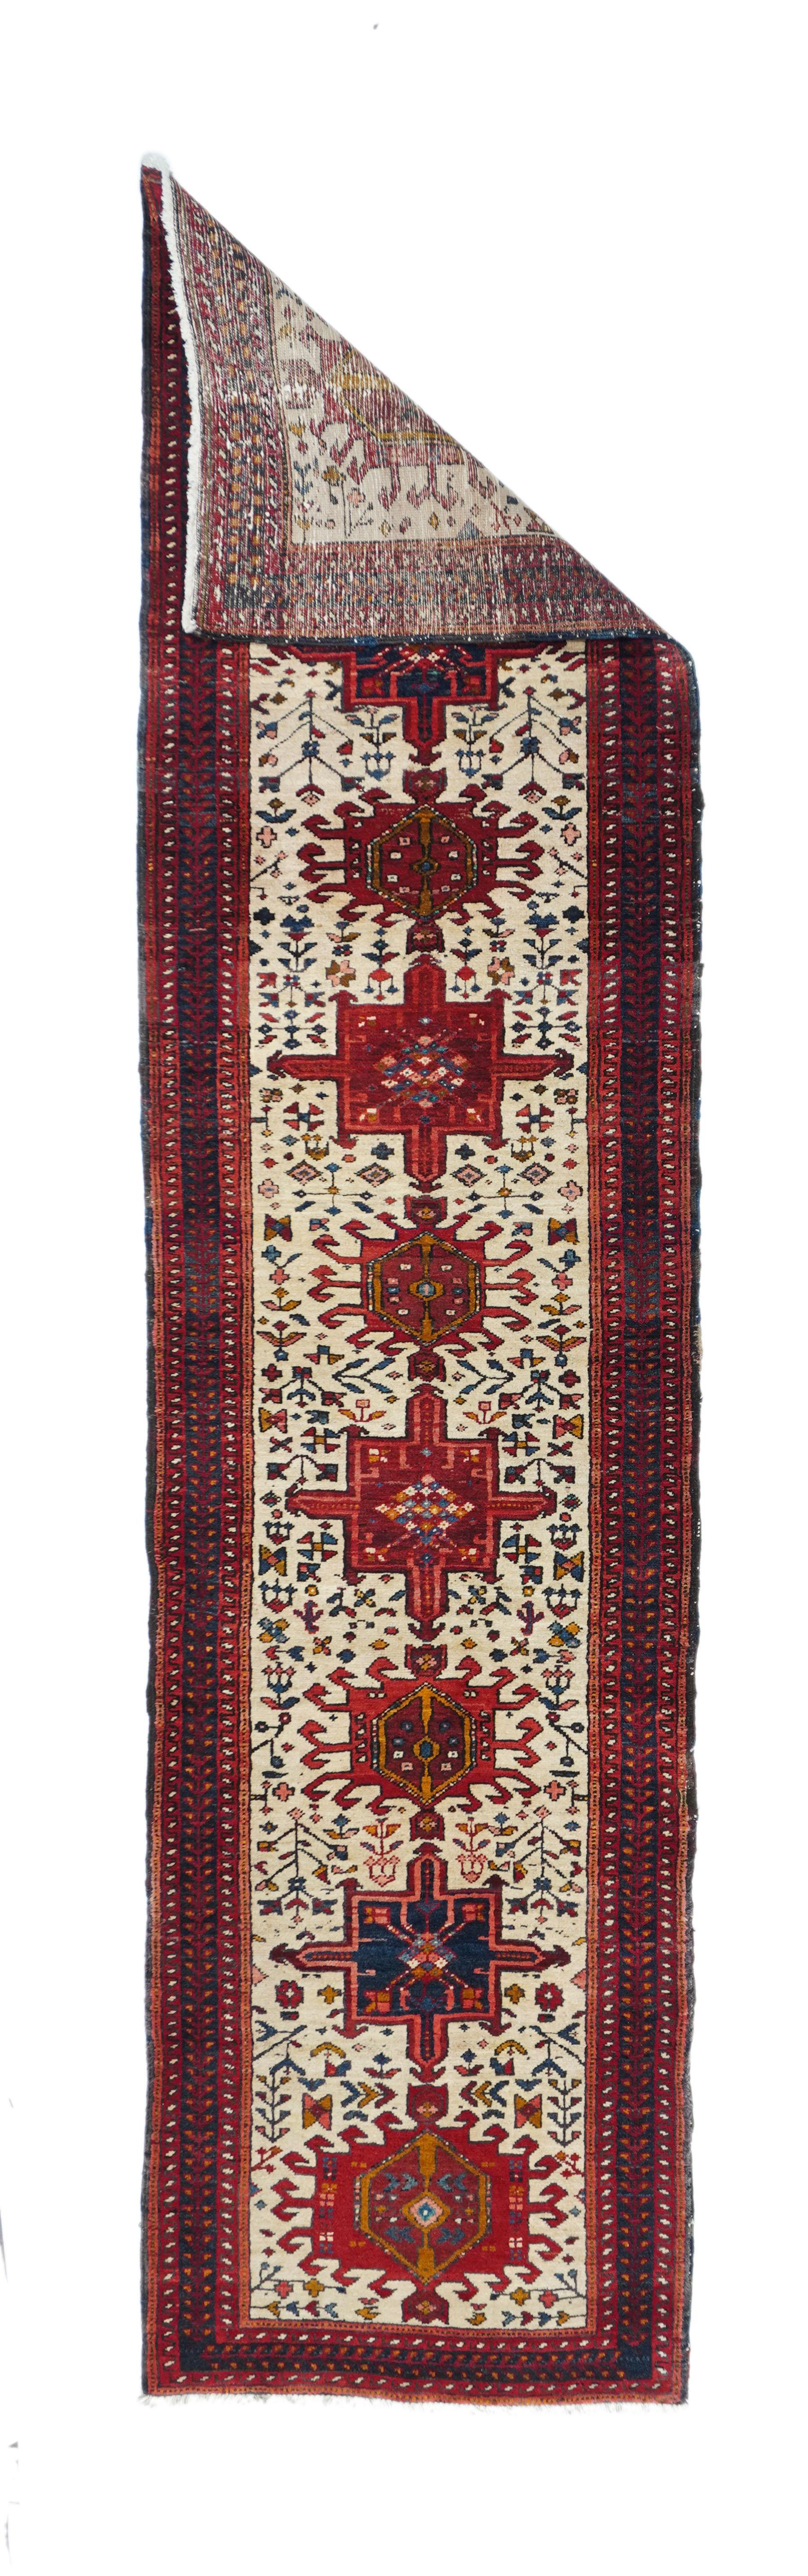 Vintage Karajeh rug 2'4'' x 9'9''. This NW Persian village kenare (runner) shows nine characteristic motives vê blue and red octogrammes, red hooked hexagons and smaller hooked polygons - all on the sandy cream field with a supporting scatter of